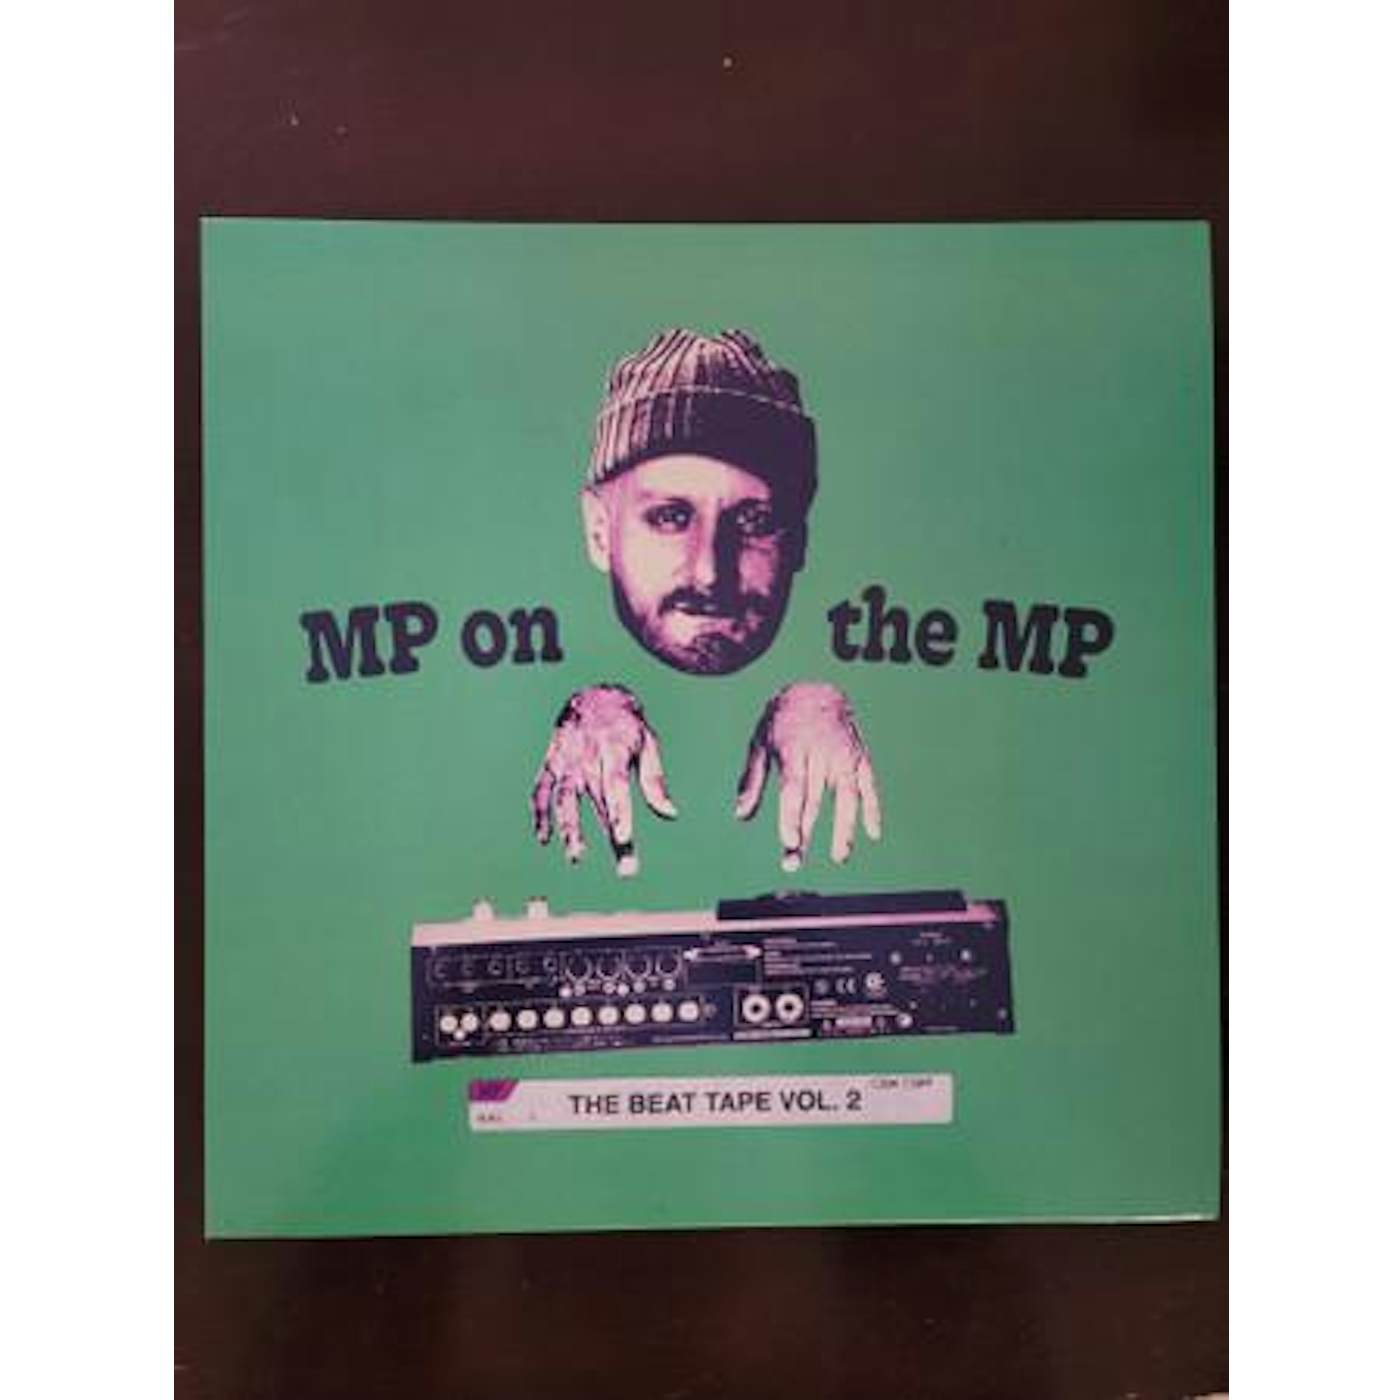 Marco Polo MP ON THE MP: THE BEAT TAPE VOL 2 Vinyl Record